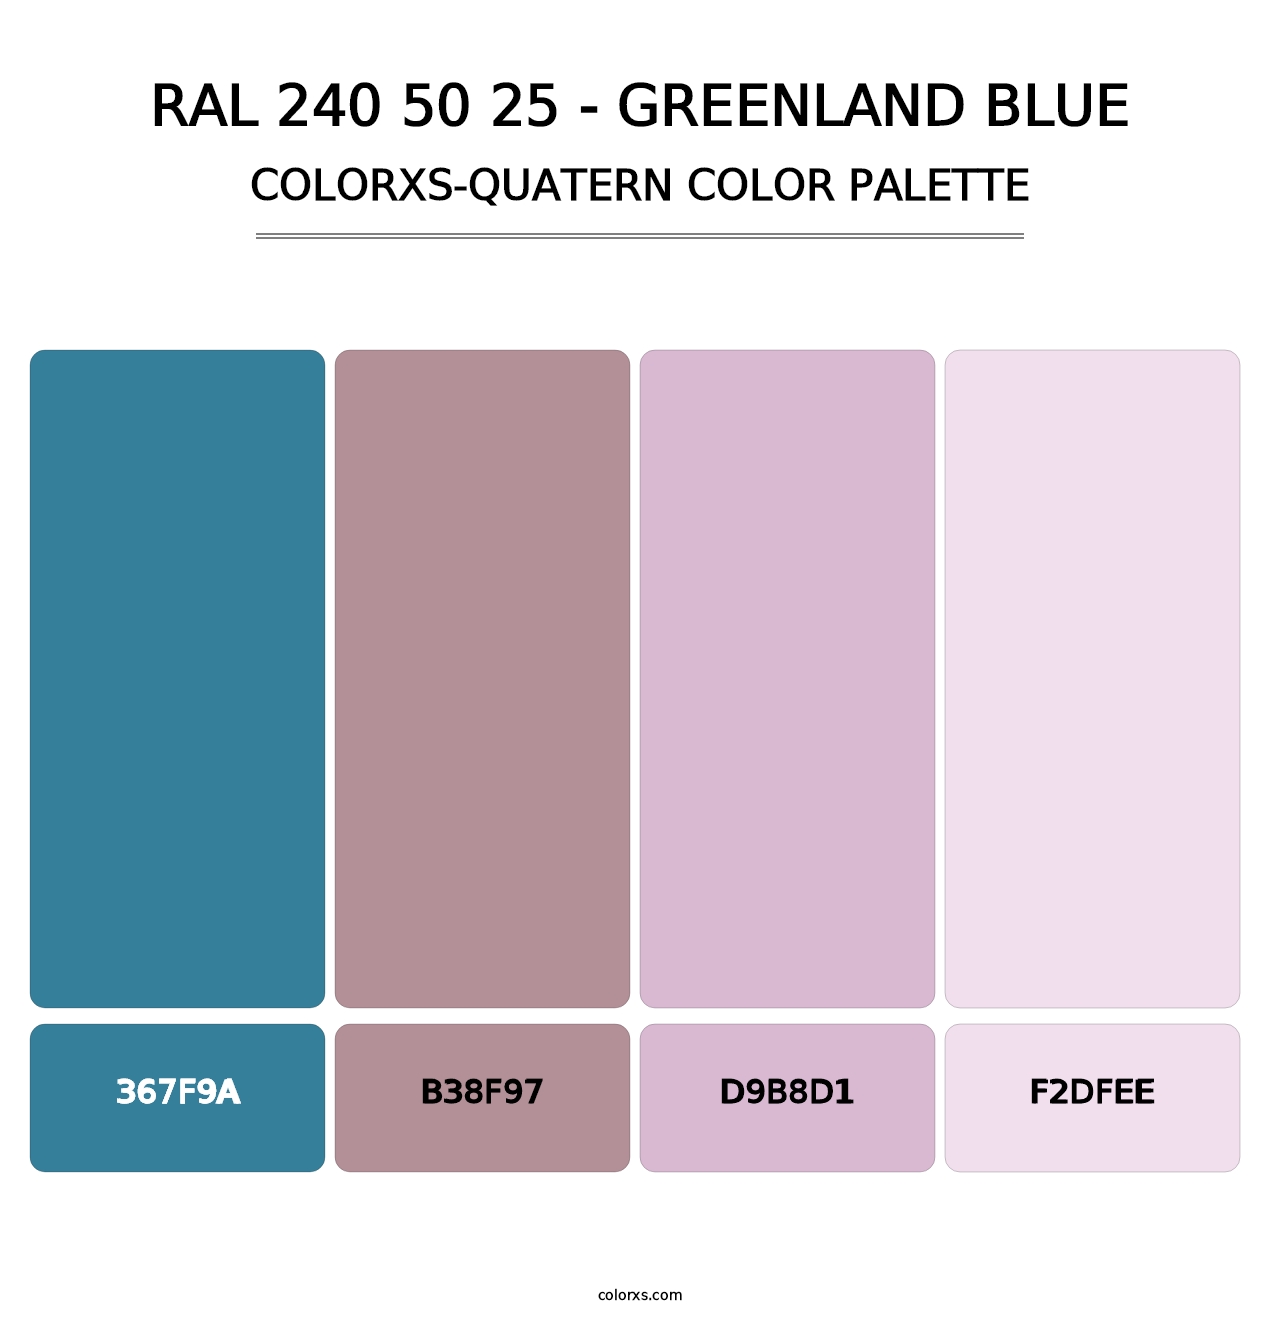 RAL 240 50 25 - Greenland Blue - Colorxs Quatern Palette